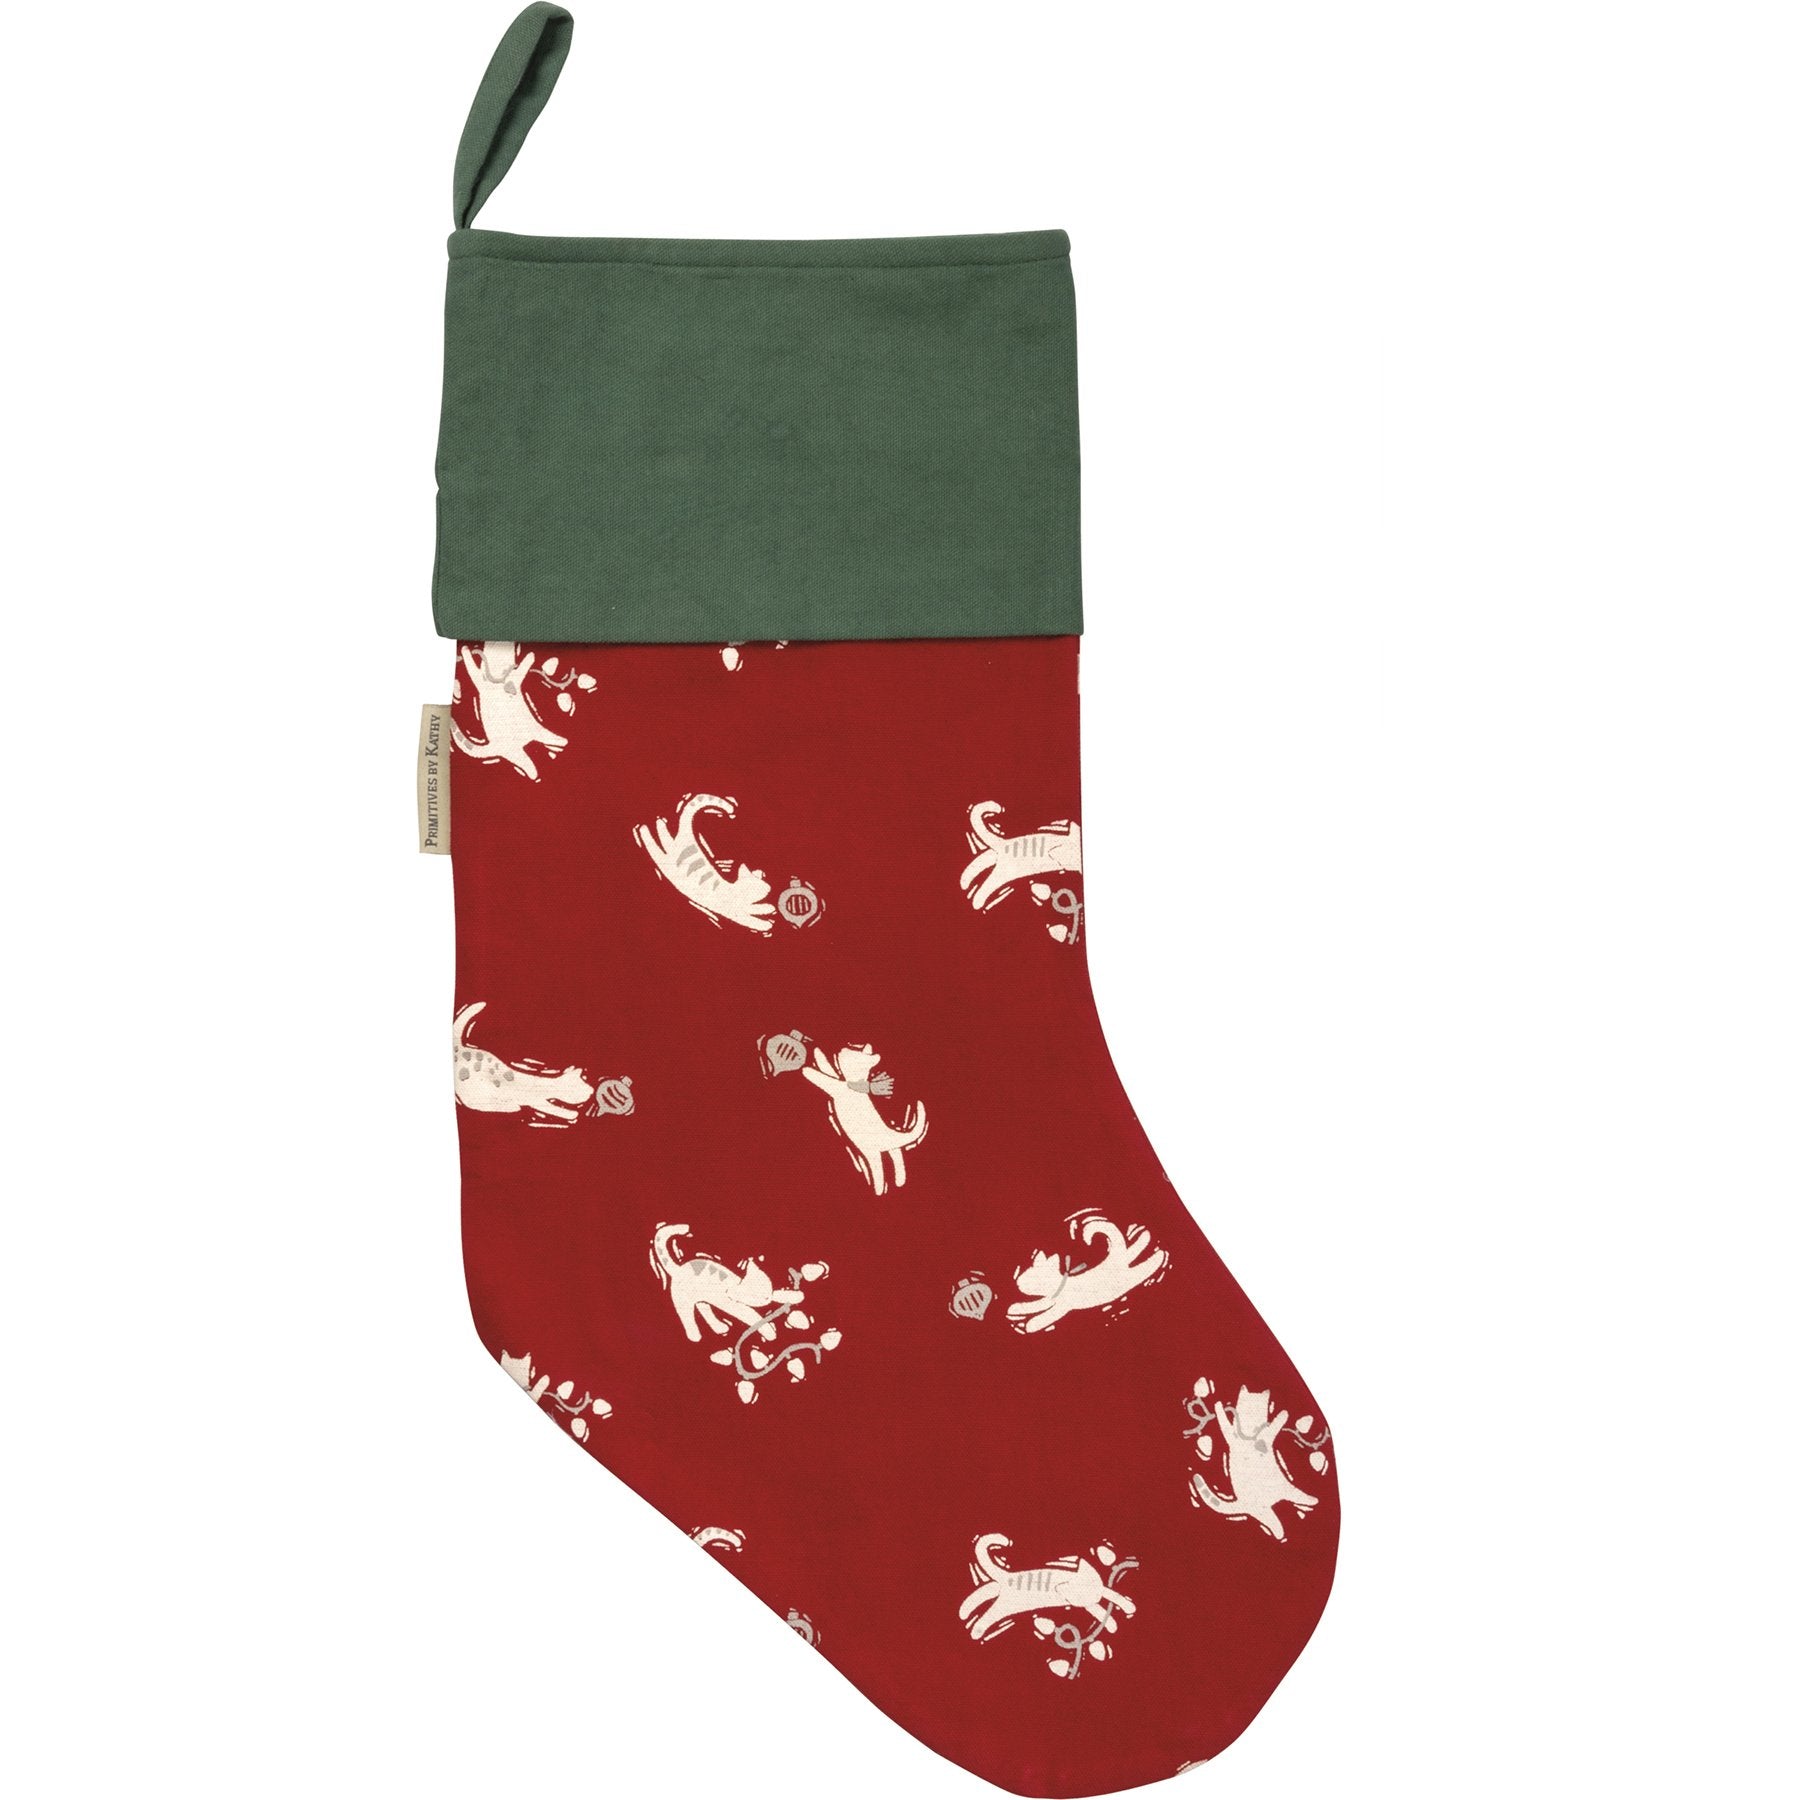 Stockings for Cats, Cat Christmas Stocking